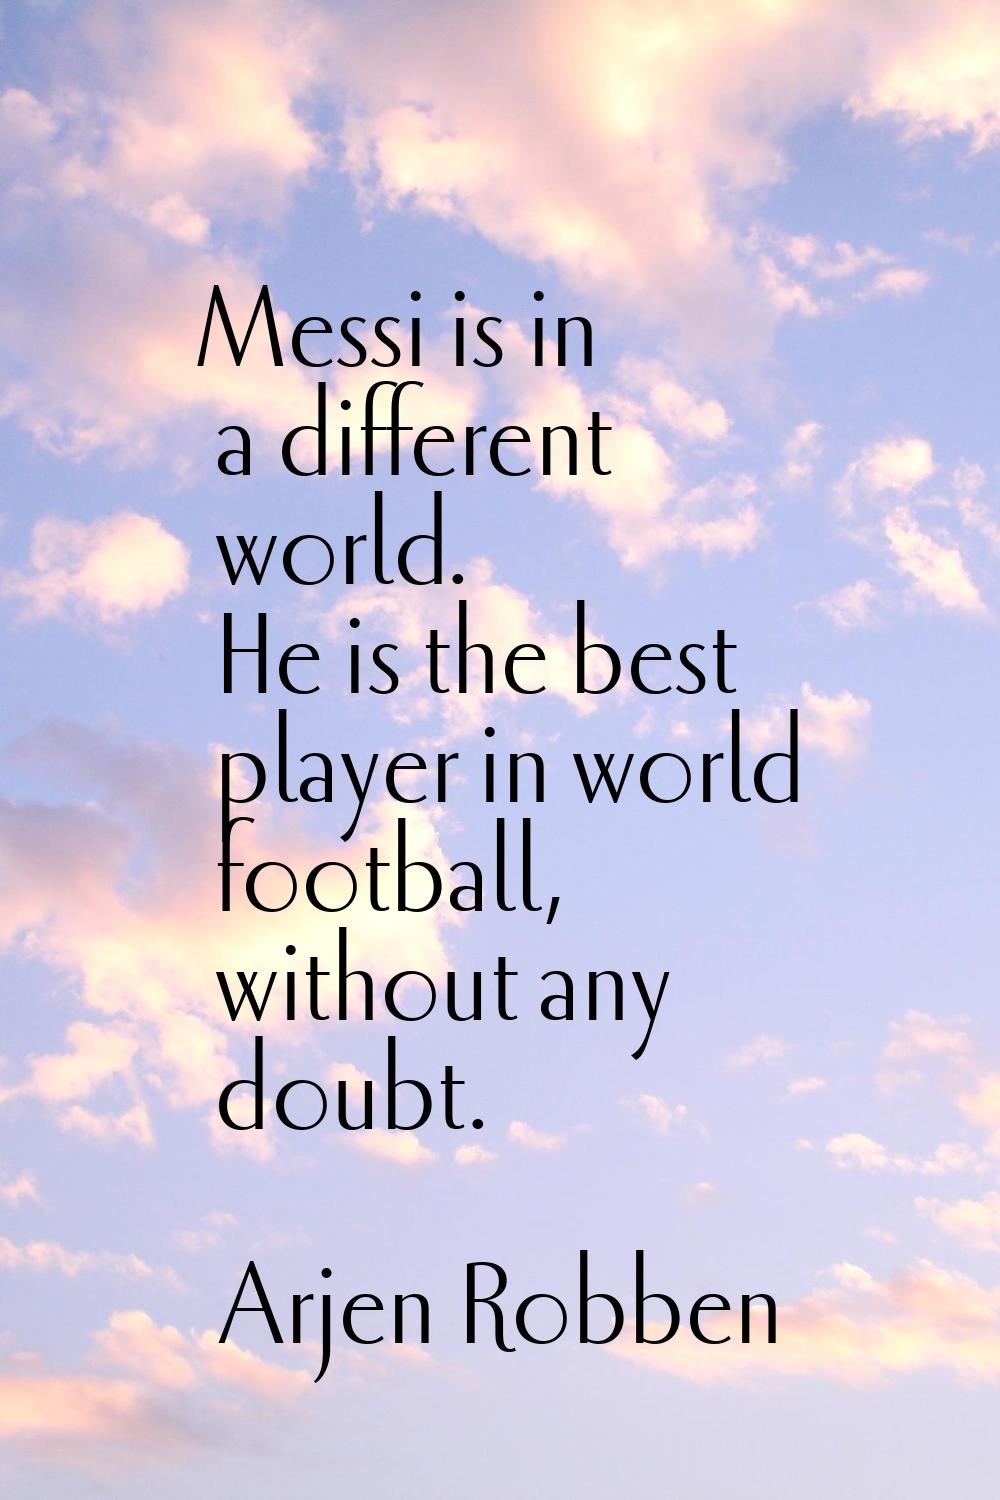 Messi is in a different world. He is the best player in world football, without any doubt.